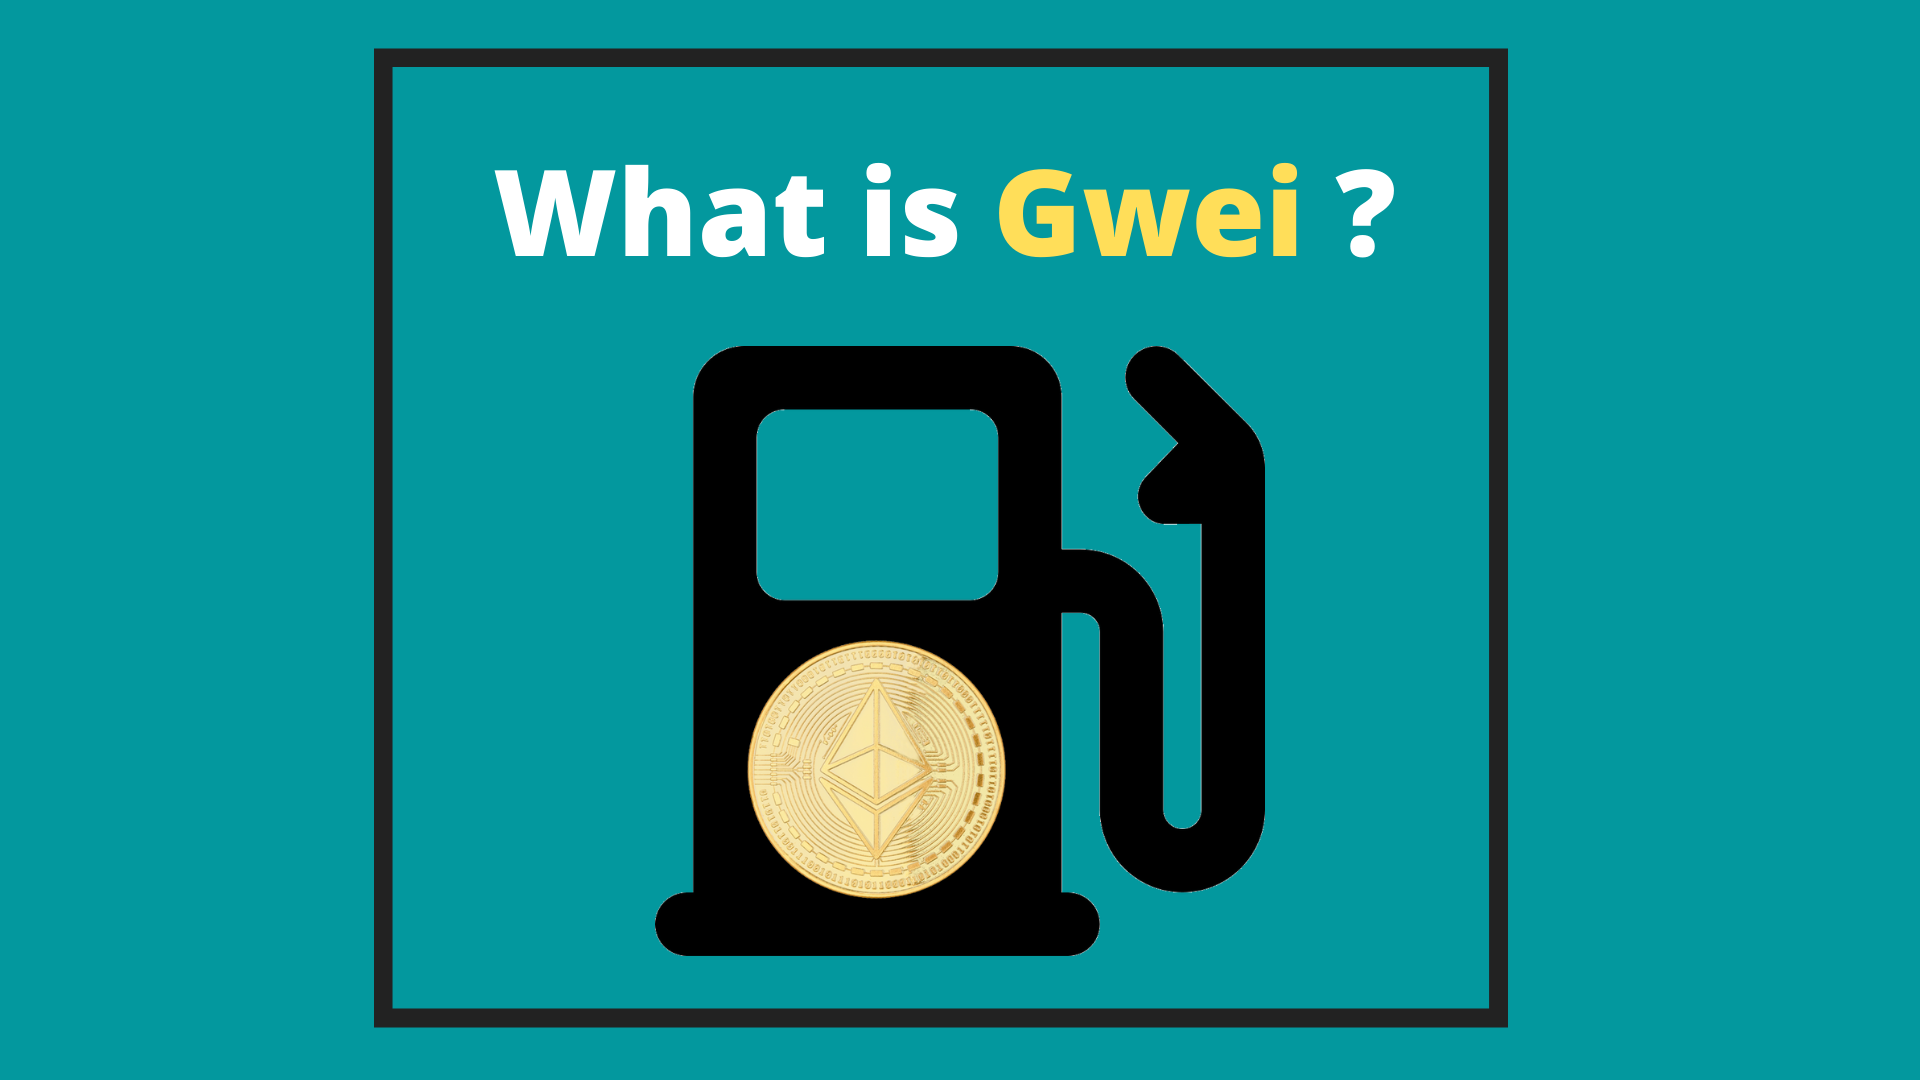 Gas Fees On Ethereum: What is Gwei, And How Do You Convert Gwei Into USD?